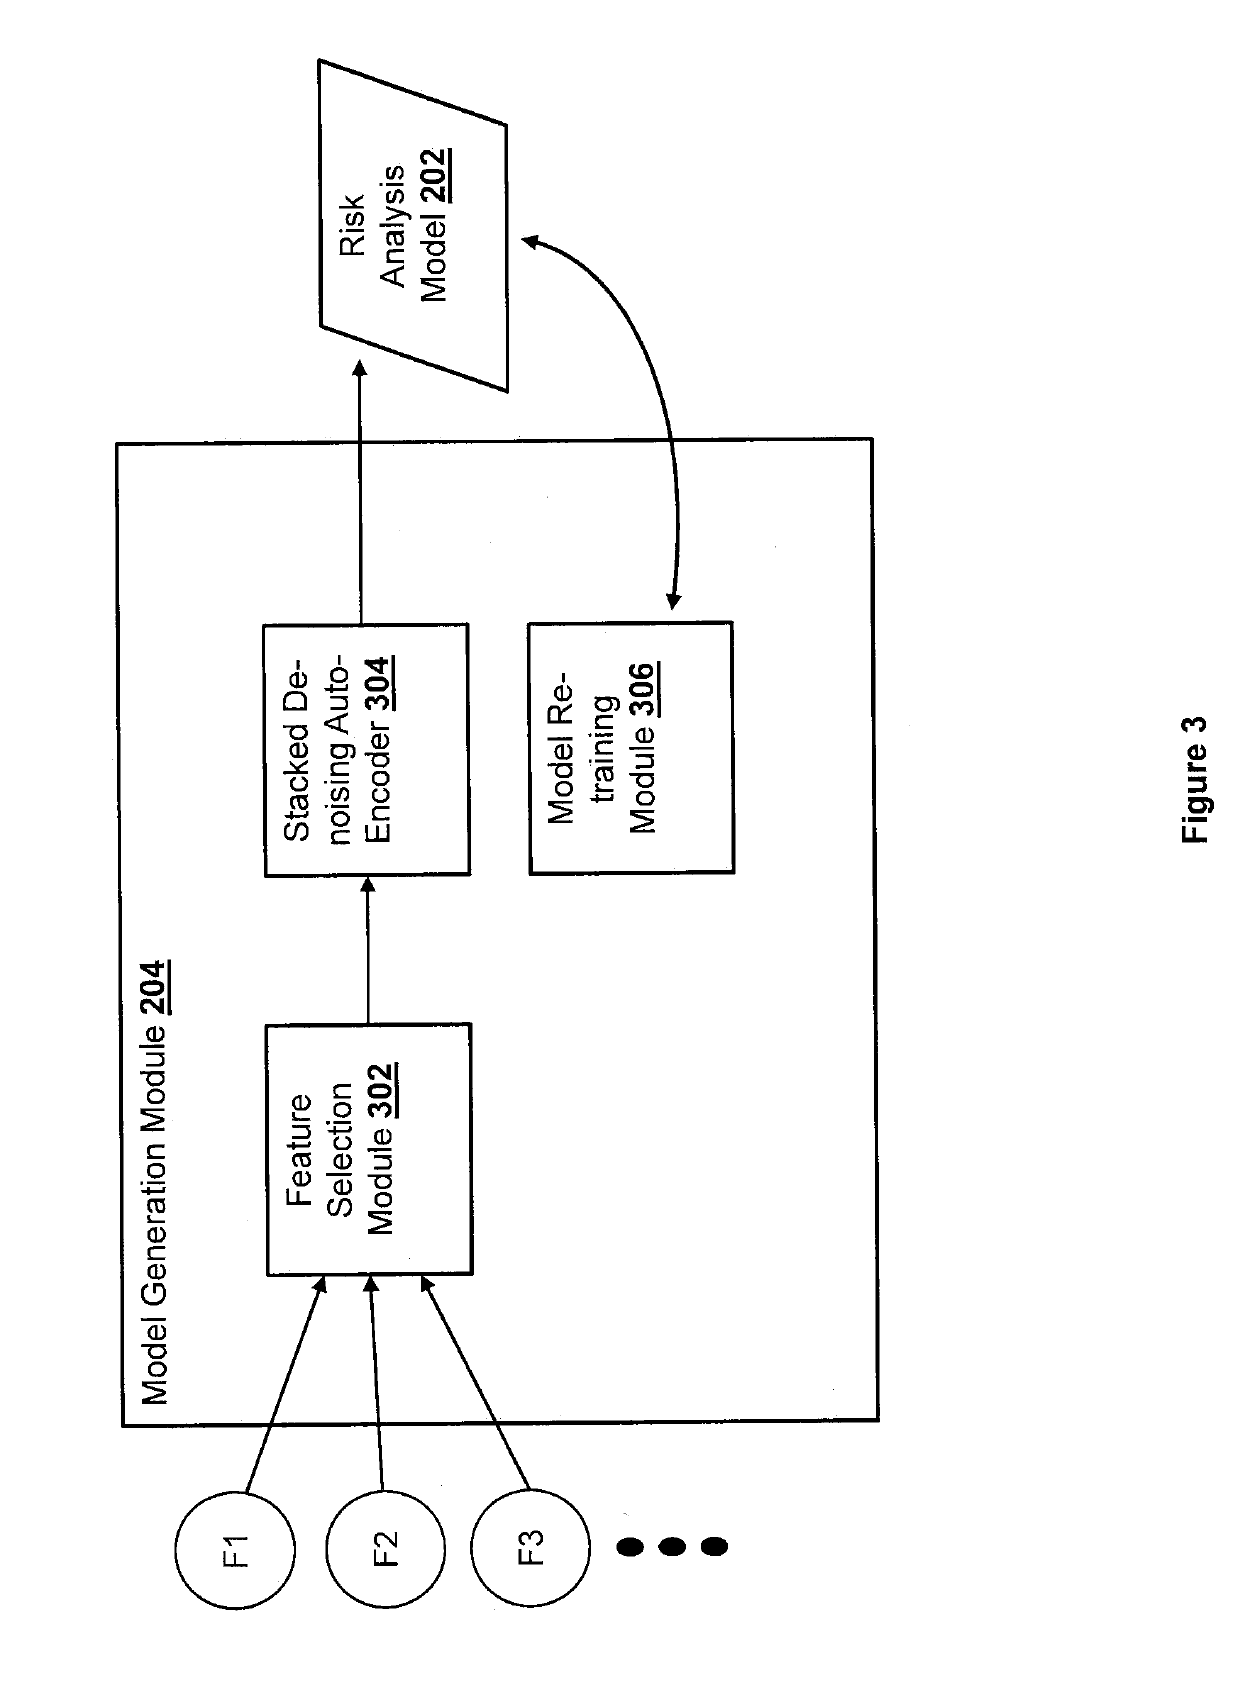 Generic learning architecture for robust temporal and domain-based transfer learning